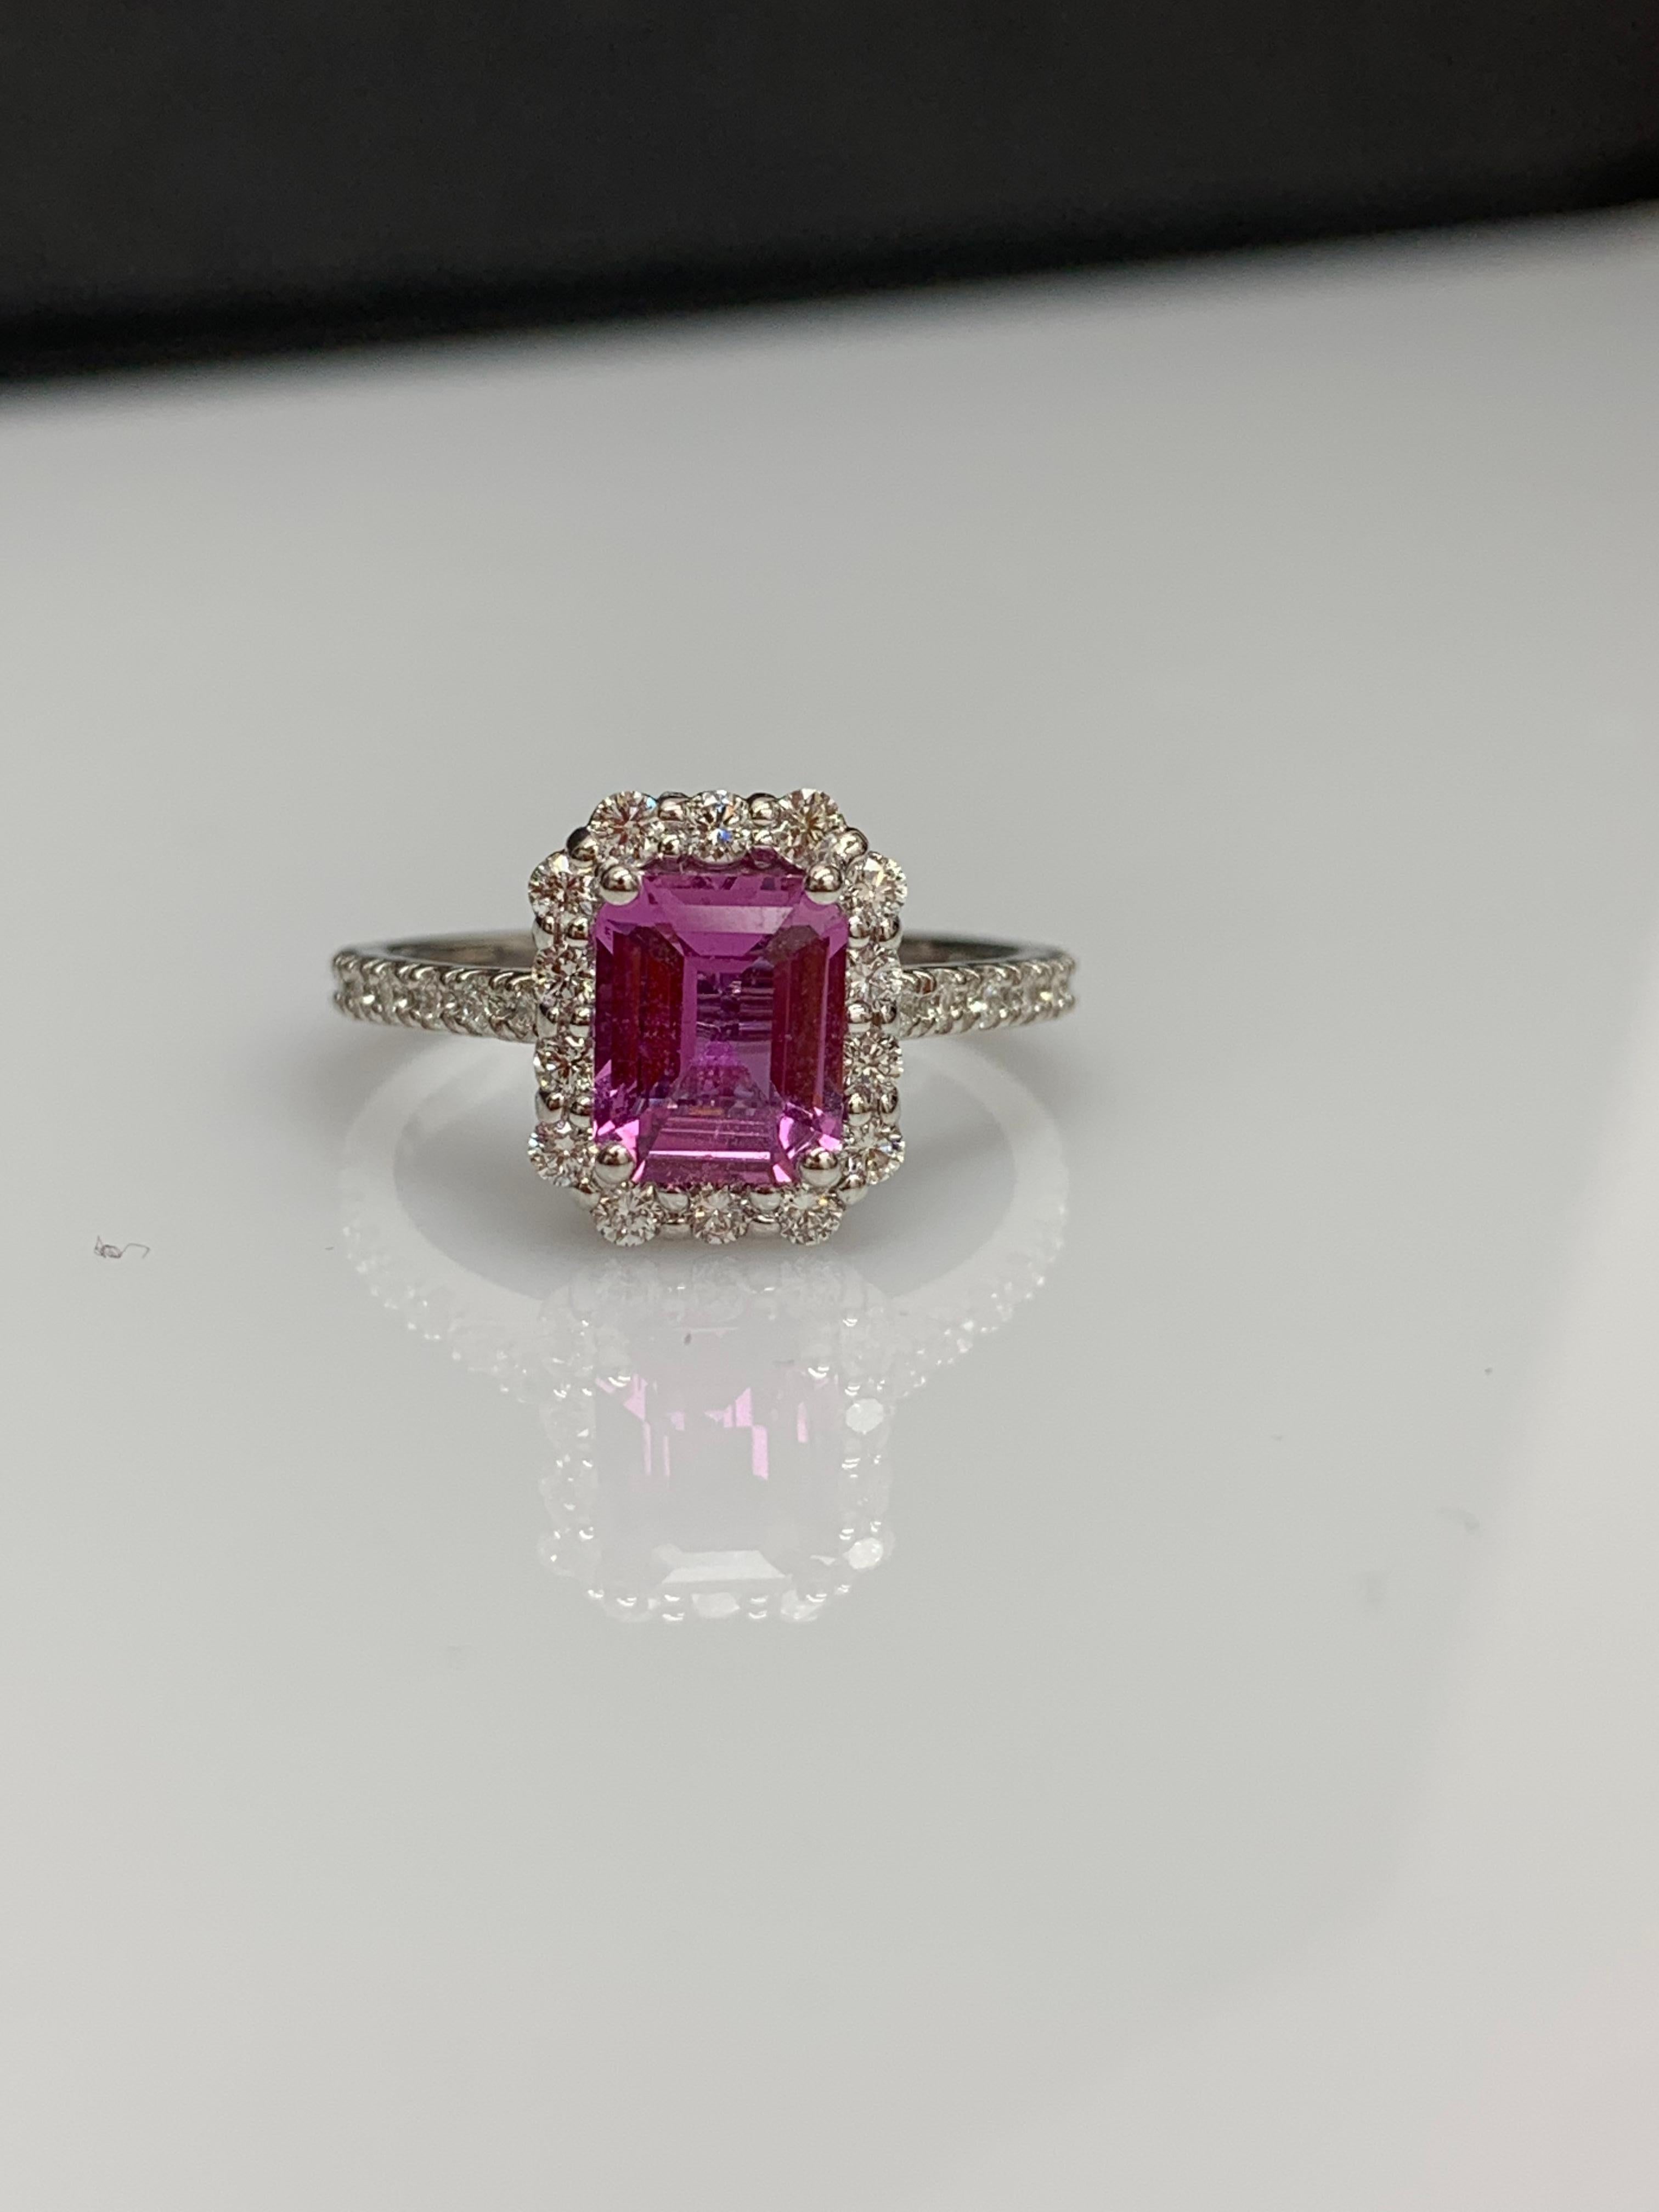 1.59 Carat Emerald Cut Pink Sapphire Diamond Engagement Ring in 14K White Gold For Sale 4